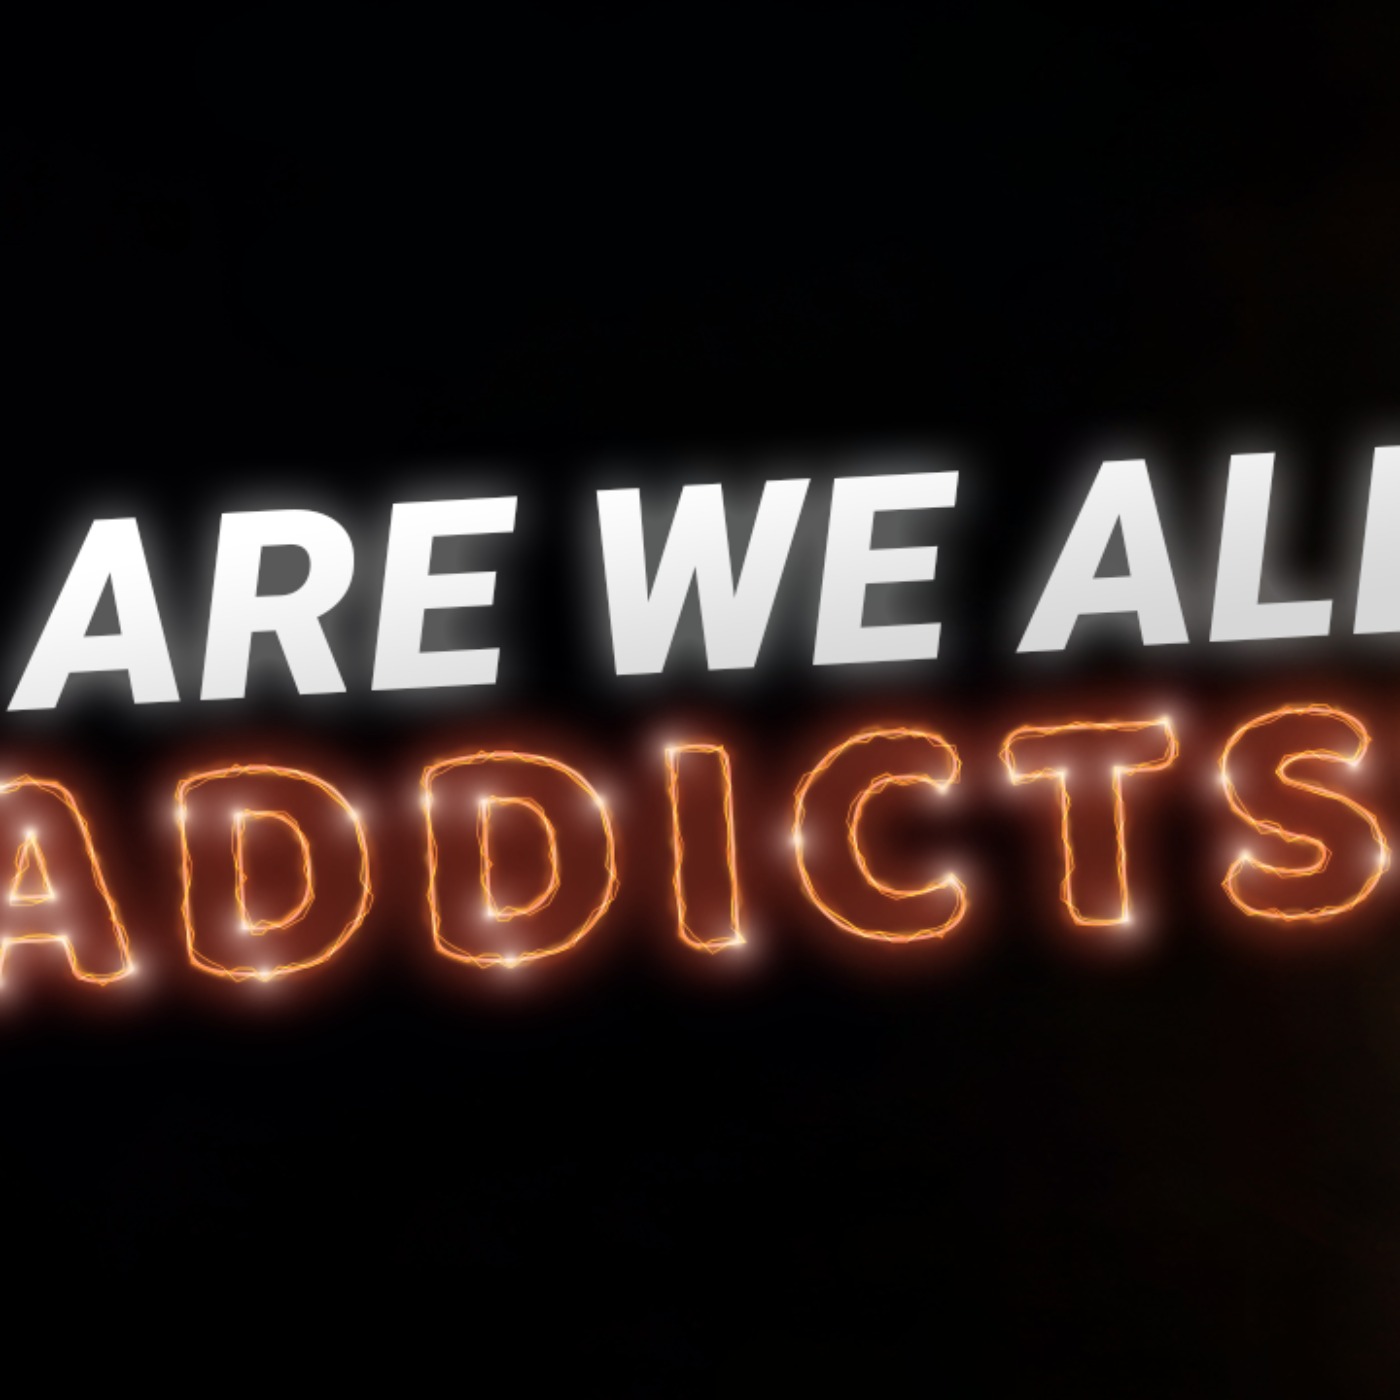 How New Addictions Are Destroying Us